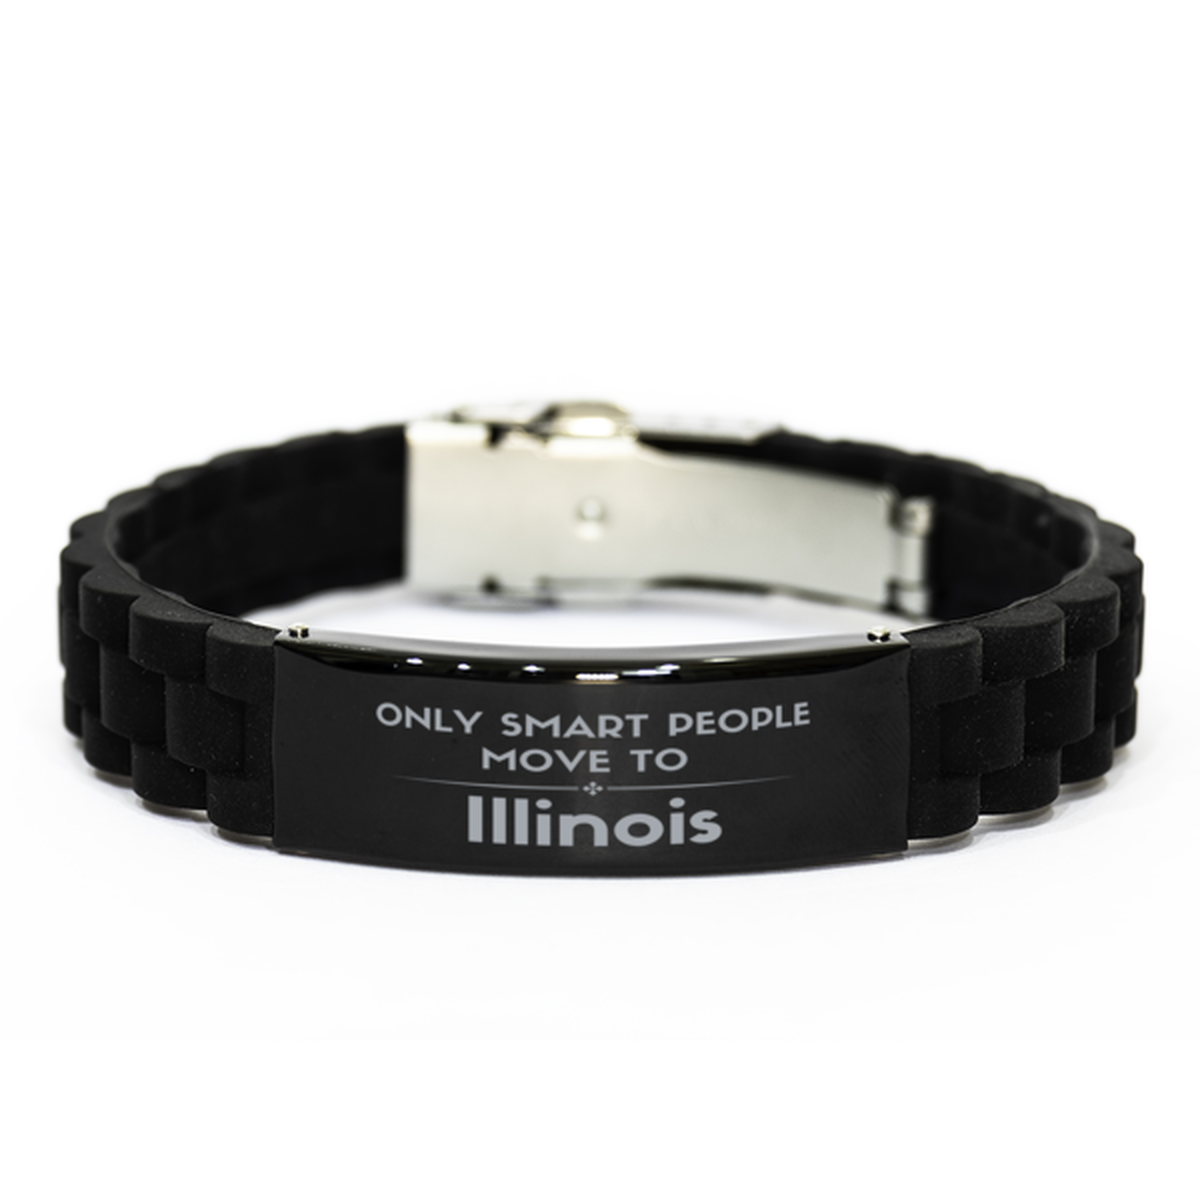 Only smart people move to Illinois Black Glidelock Clasp Bracelet, Gag Gifts For Illinois, Move to Illinois Gifts for Friends Coworker Funny Saying Quote